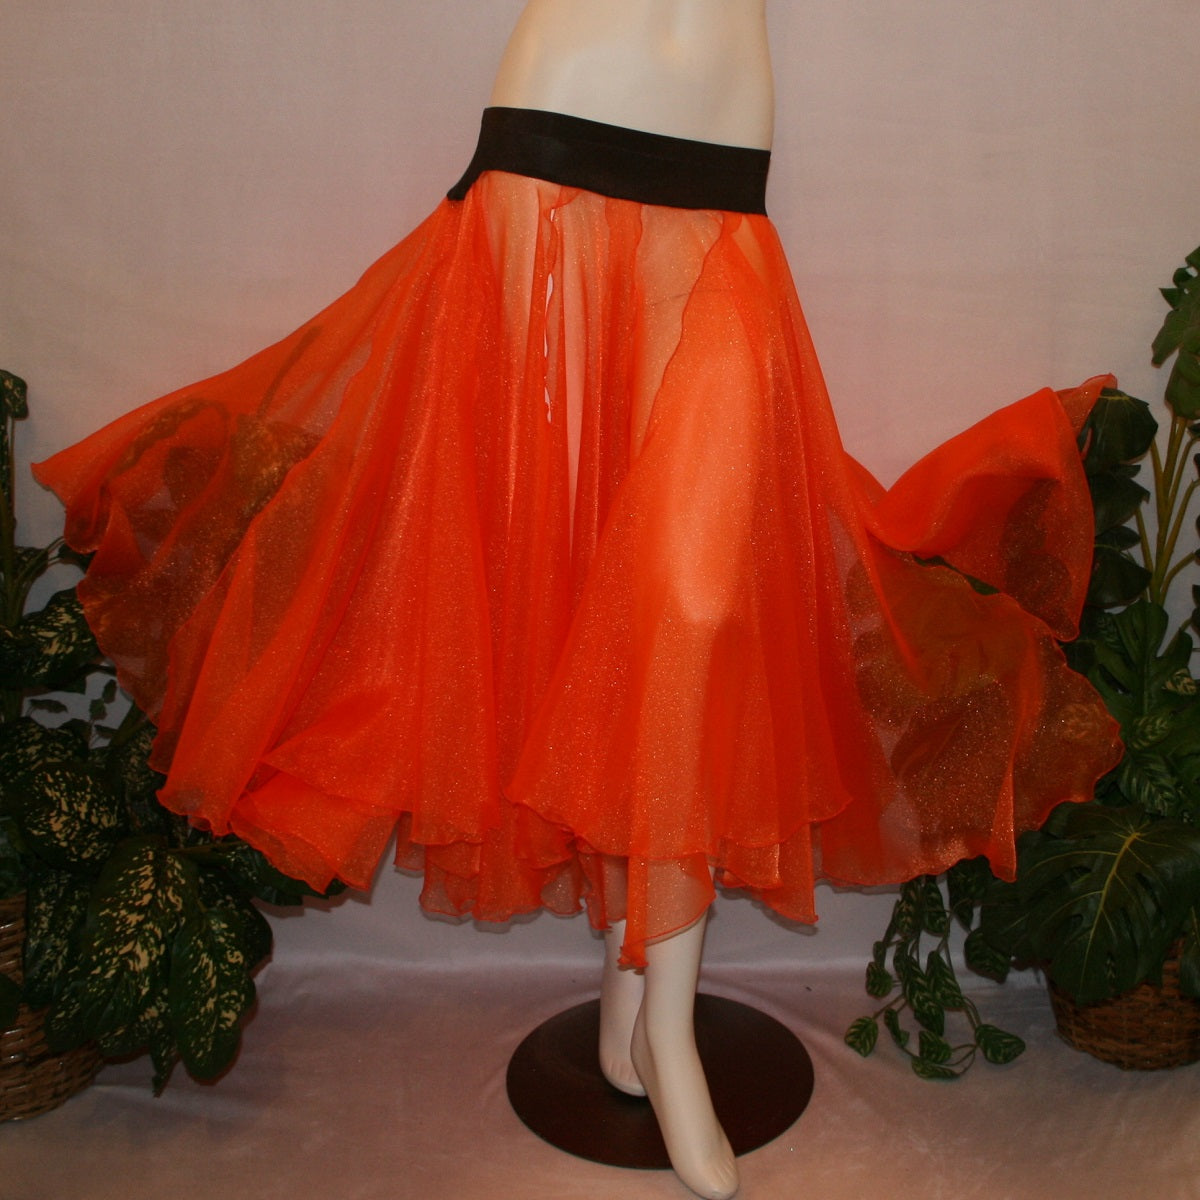 Orange ballroom skirt in yards of large petal shape panels of orange organza with a brown waistband to pair with one of our Fall Flowers dresses to create a converta ballroom dress.   The skirt can be custom made in many other colors.